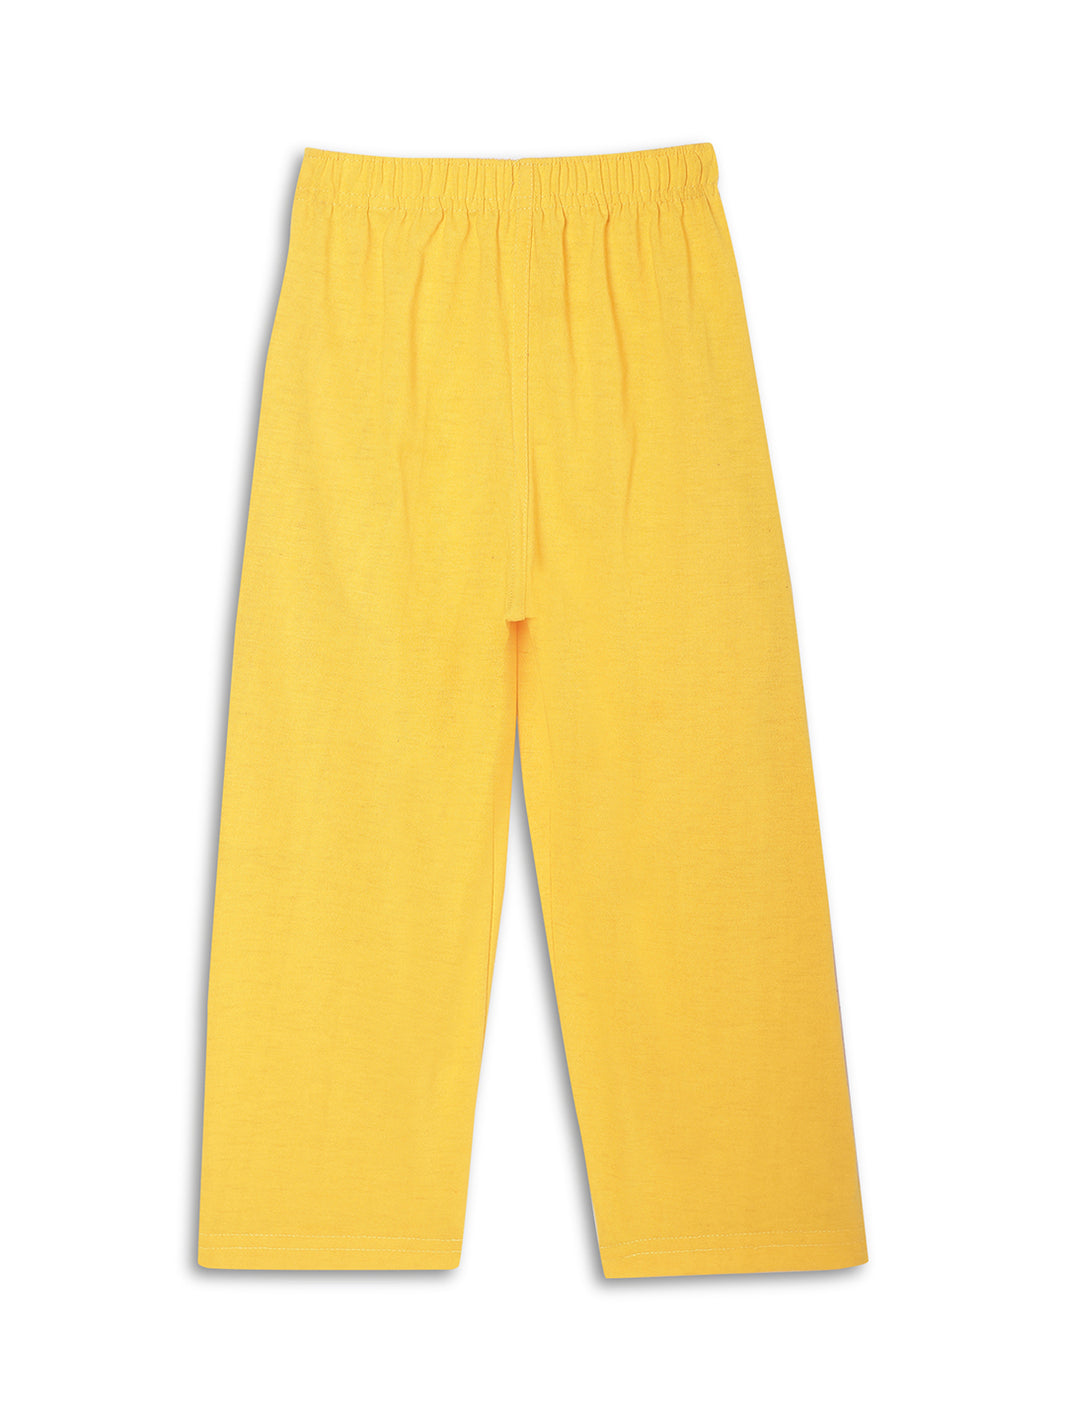 Vimal Jonney Printed  Yellow Regular Fit Cotton blended Trackpant For Boys